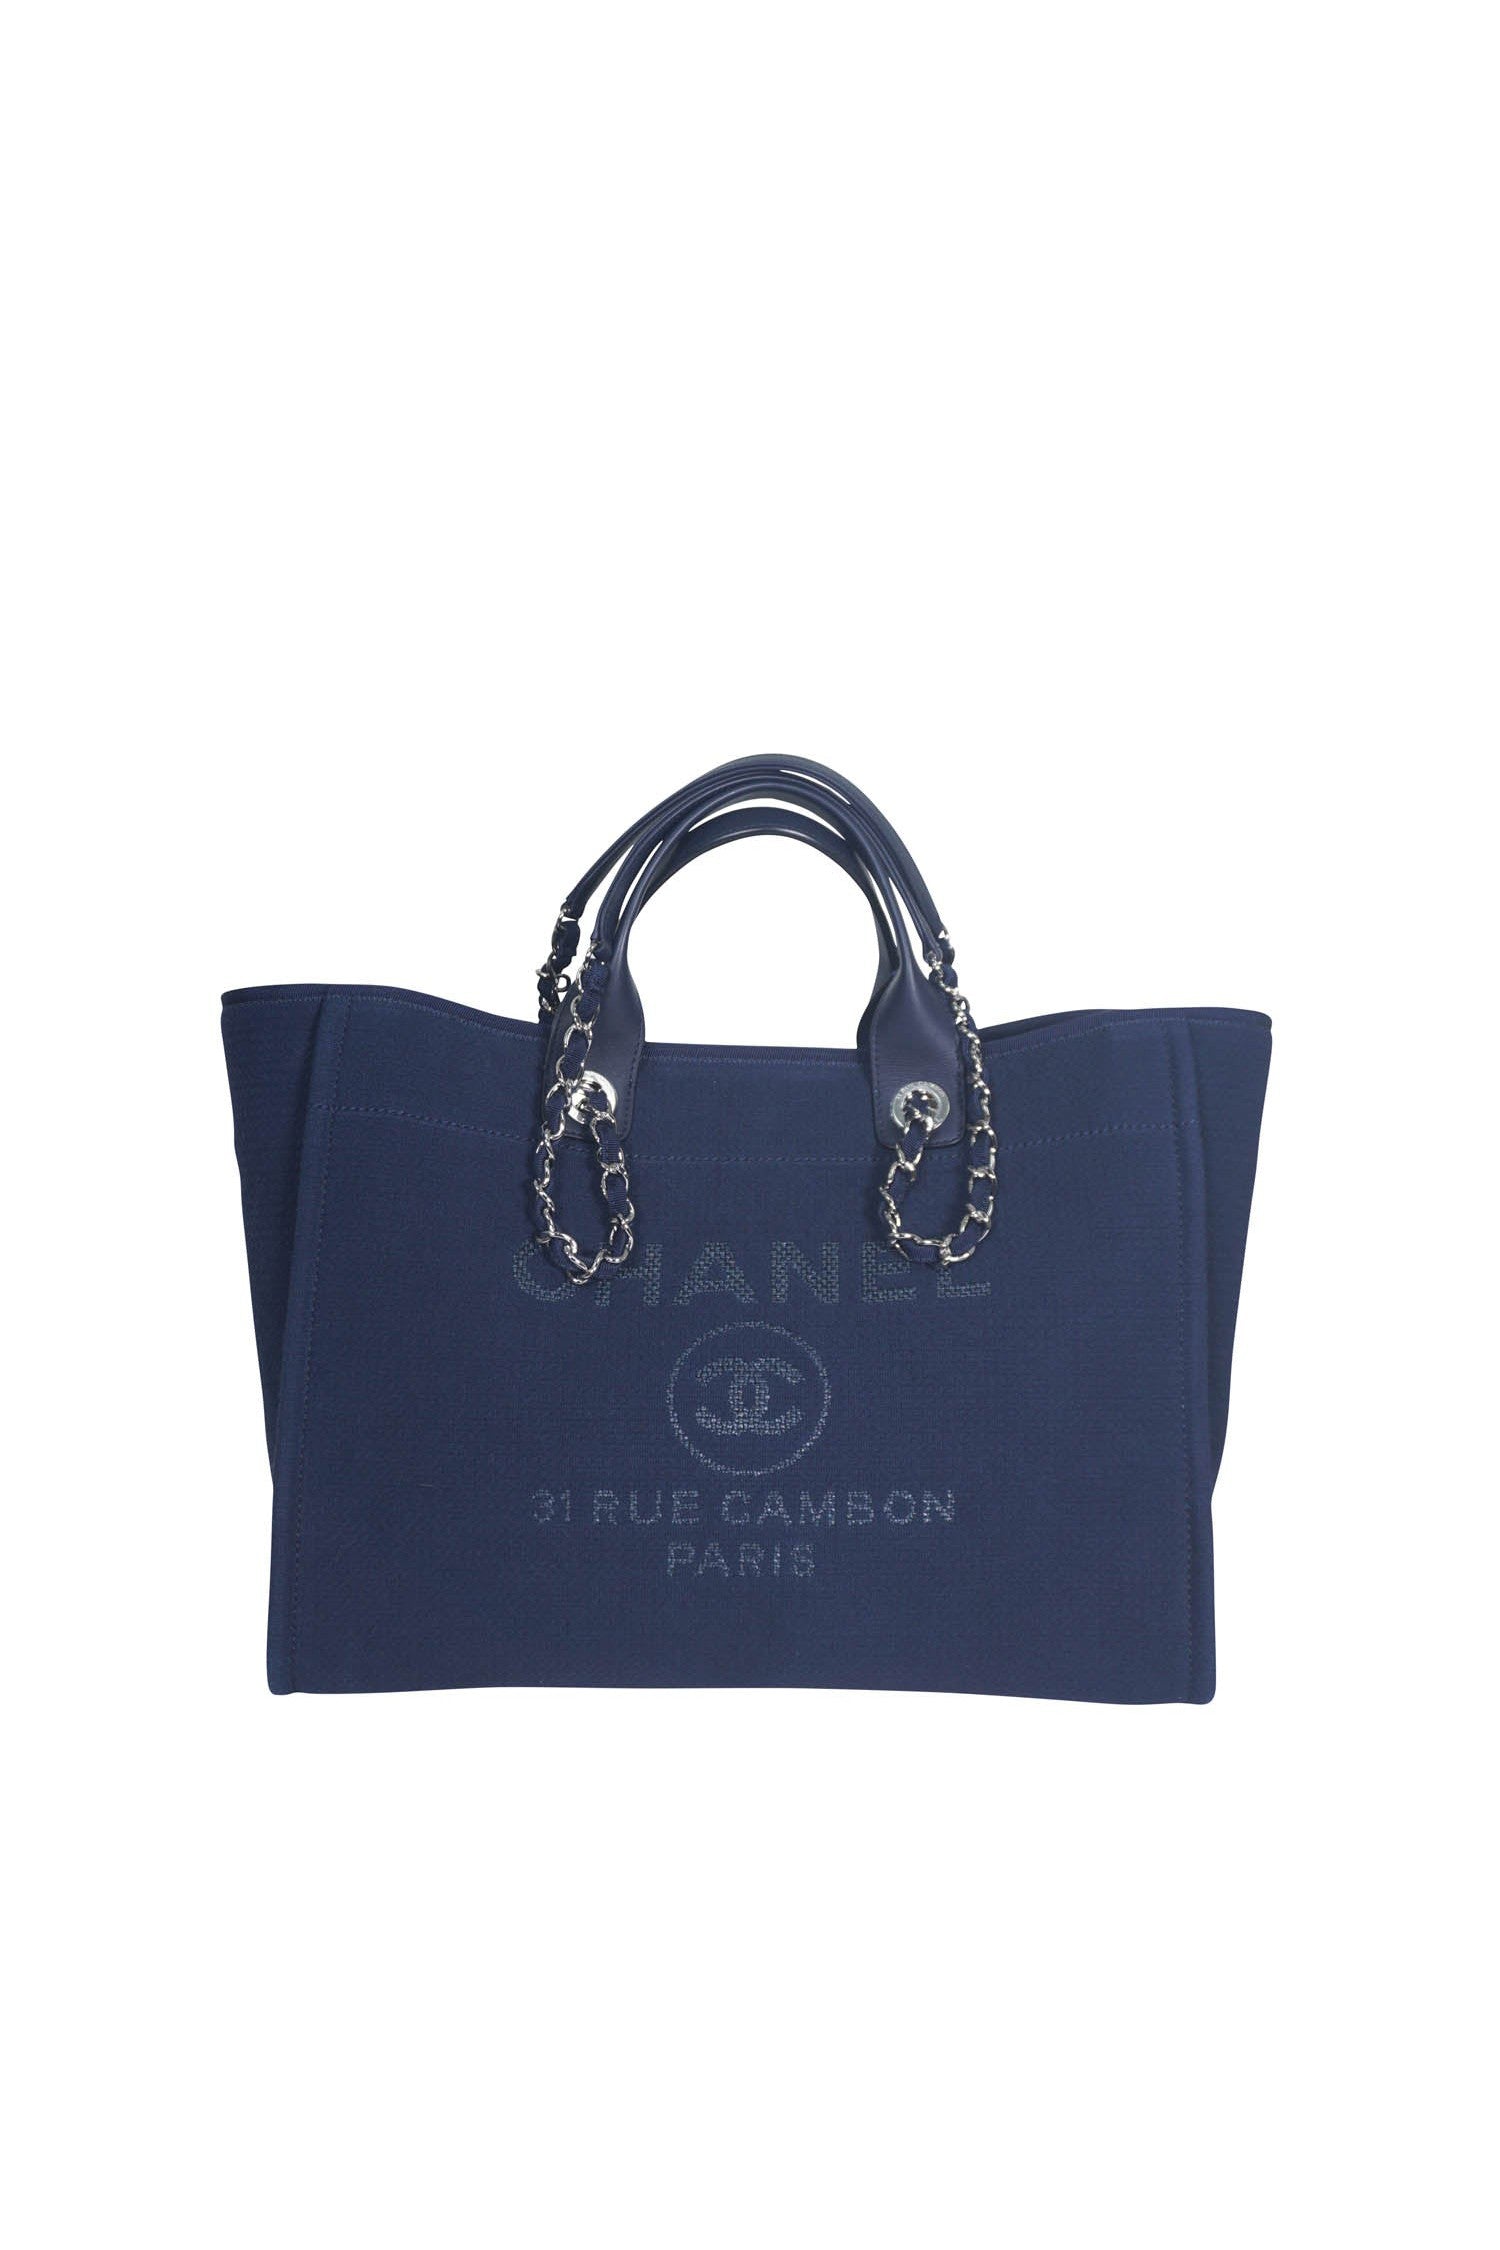 Chanel Navy Blue Deauville Shopping Tote SHW 2022 - Foxy Couture Carmel